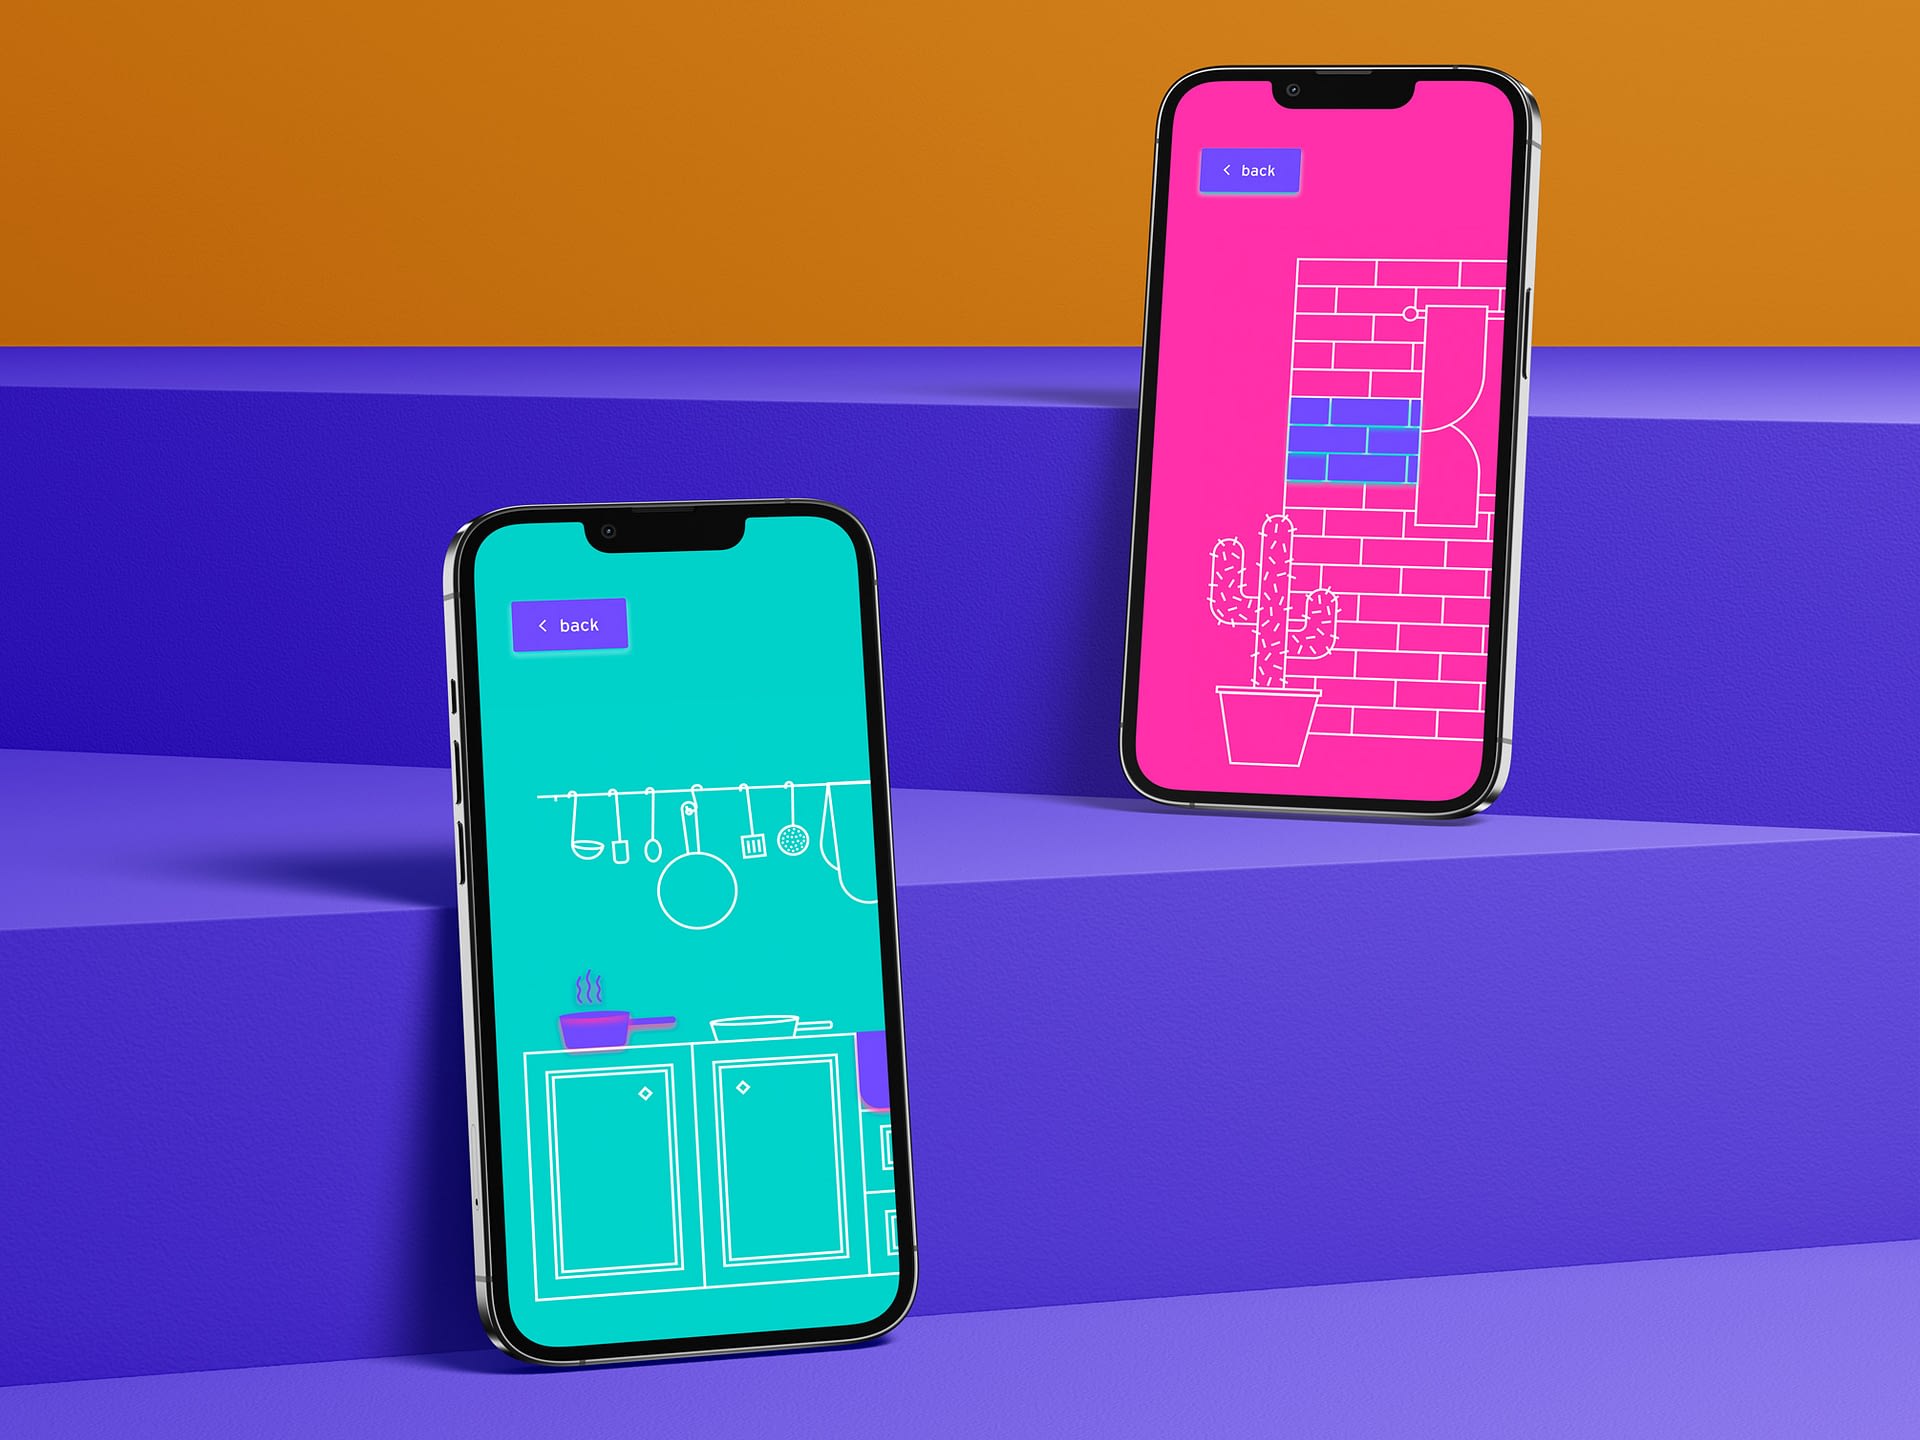 Two Iphones sit on purples ledges showing digital line drawings of a kitchen in blue and a bathroom in pink